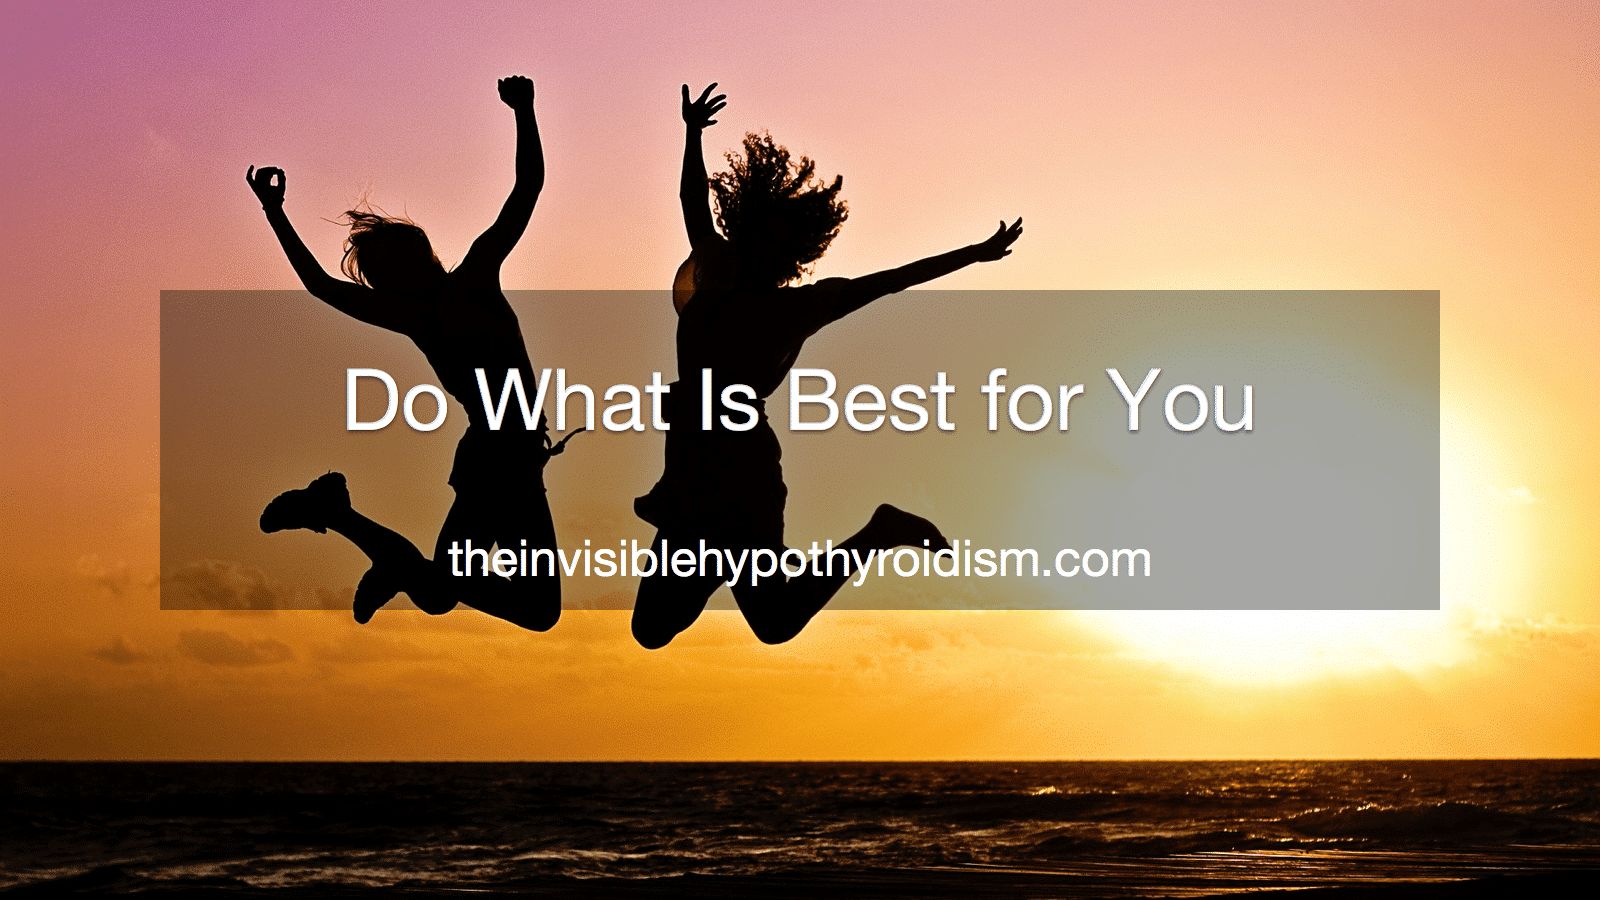 Do What Is Best for You